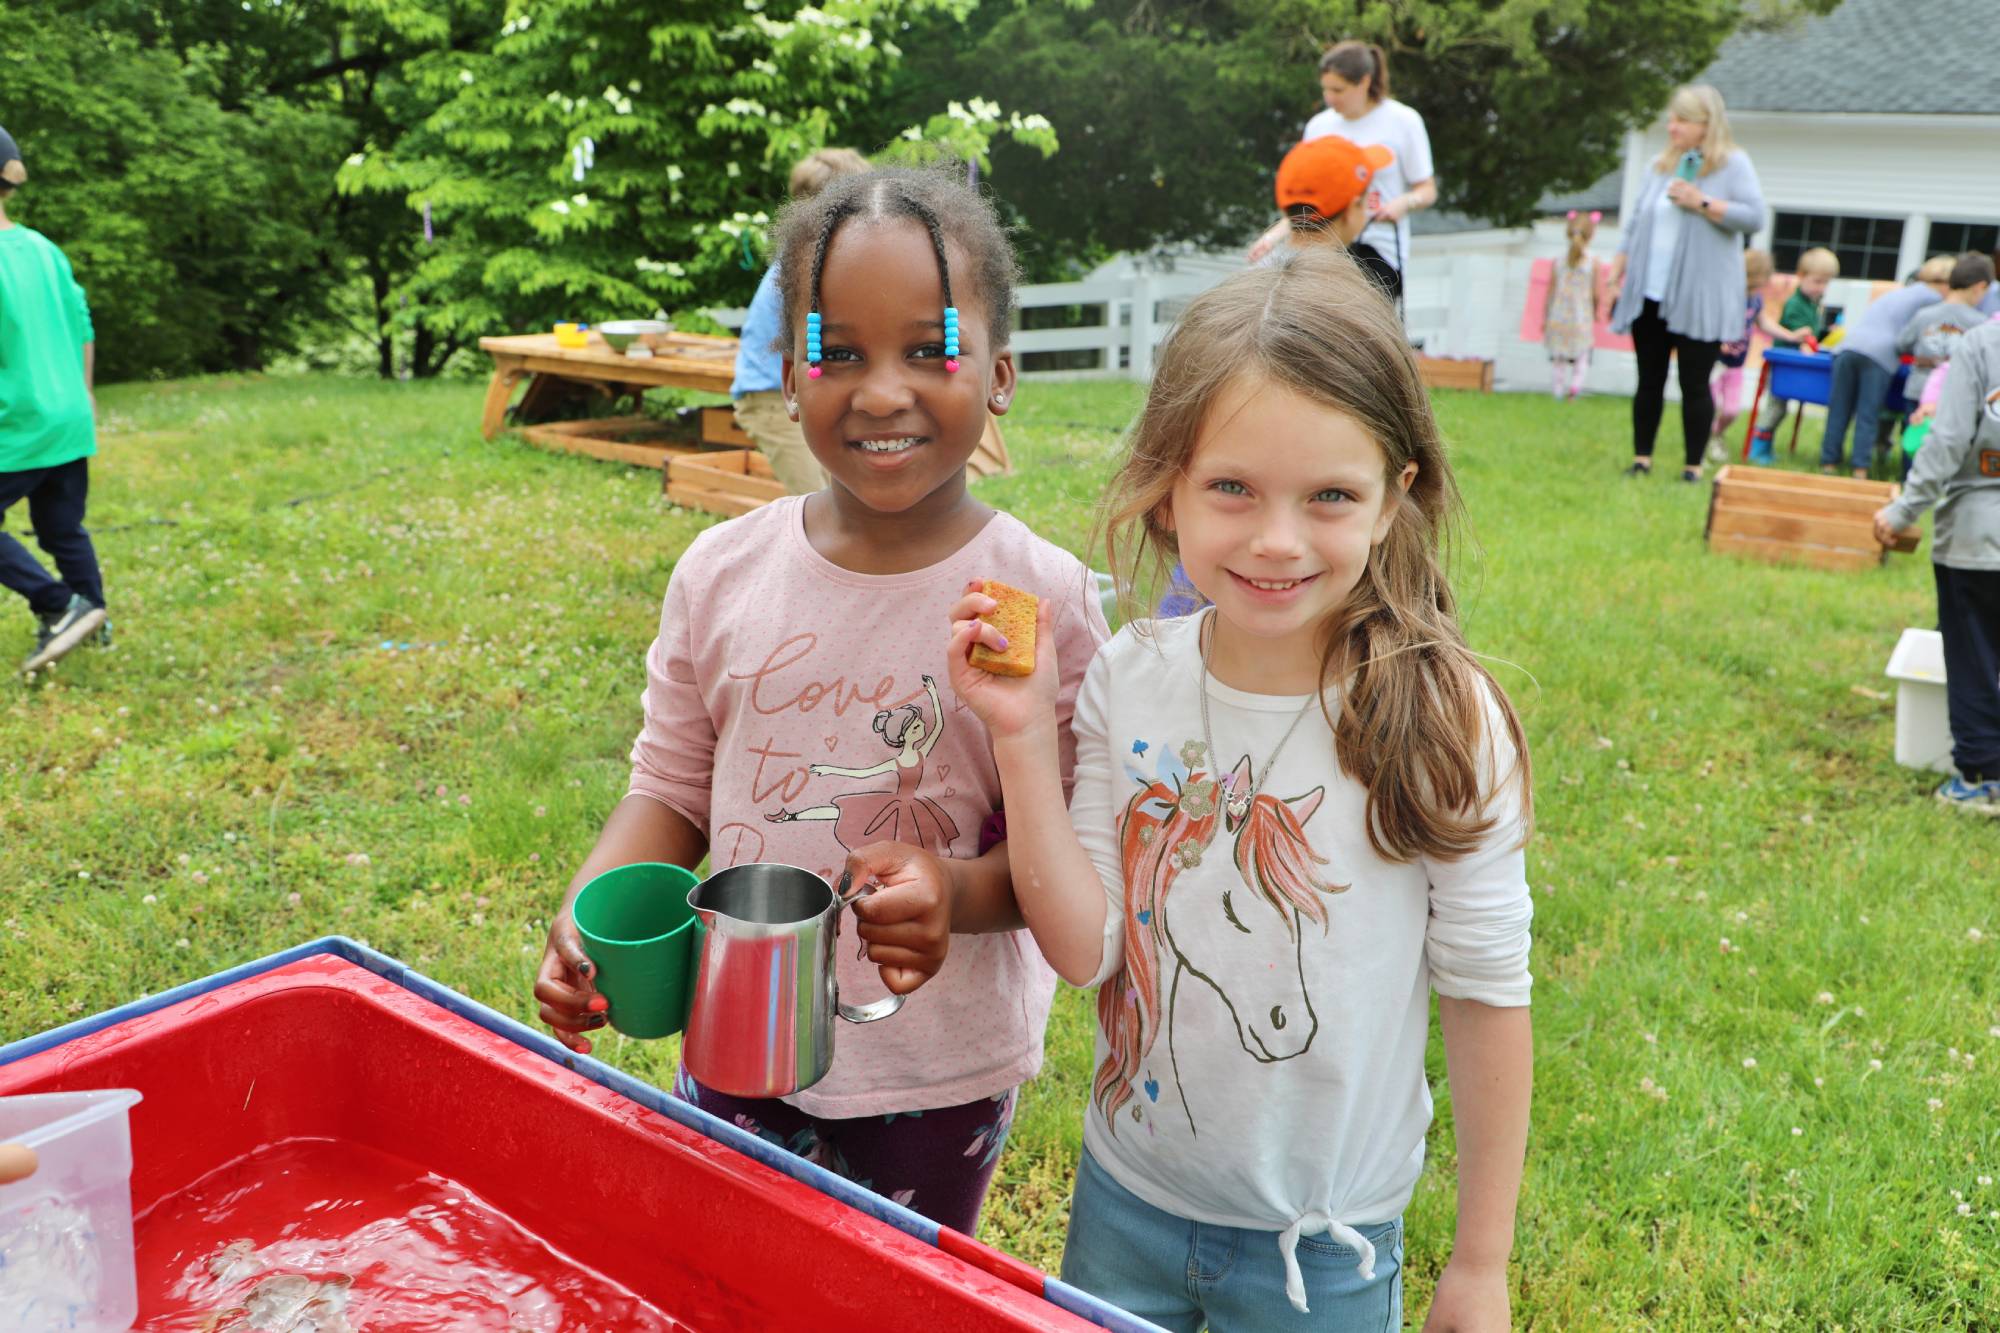 Lower Elementary School Students learning through play outdoors